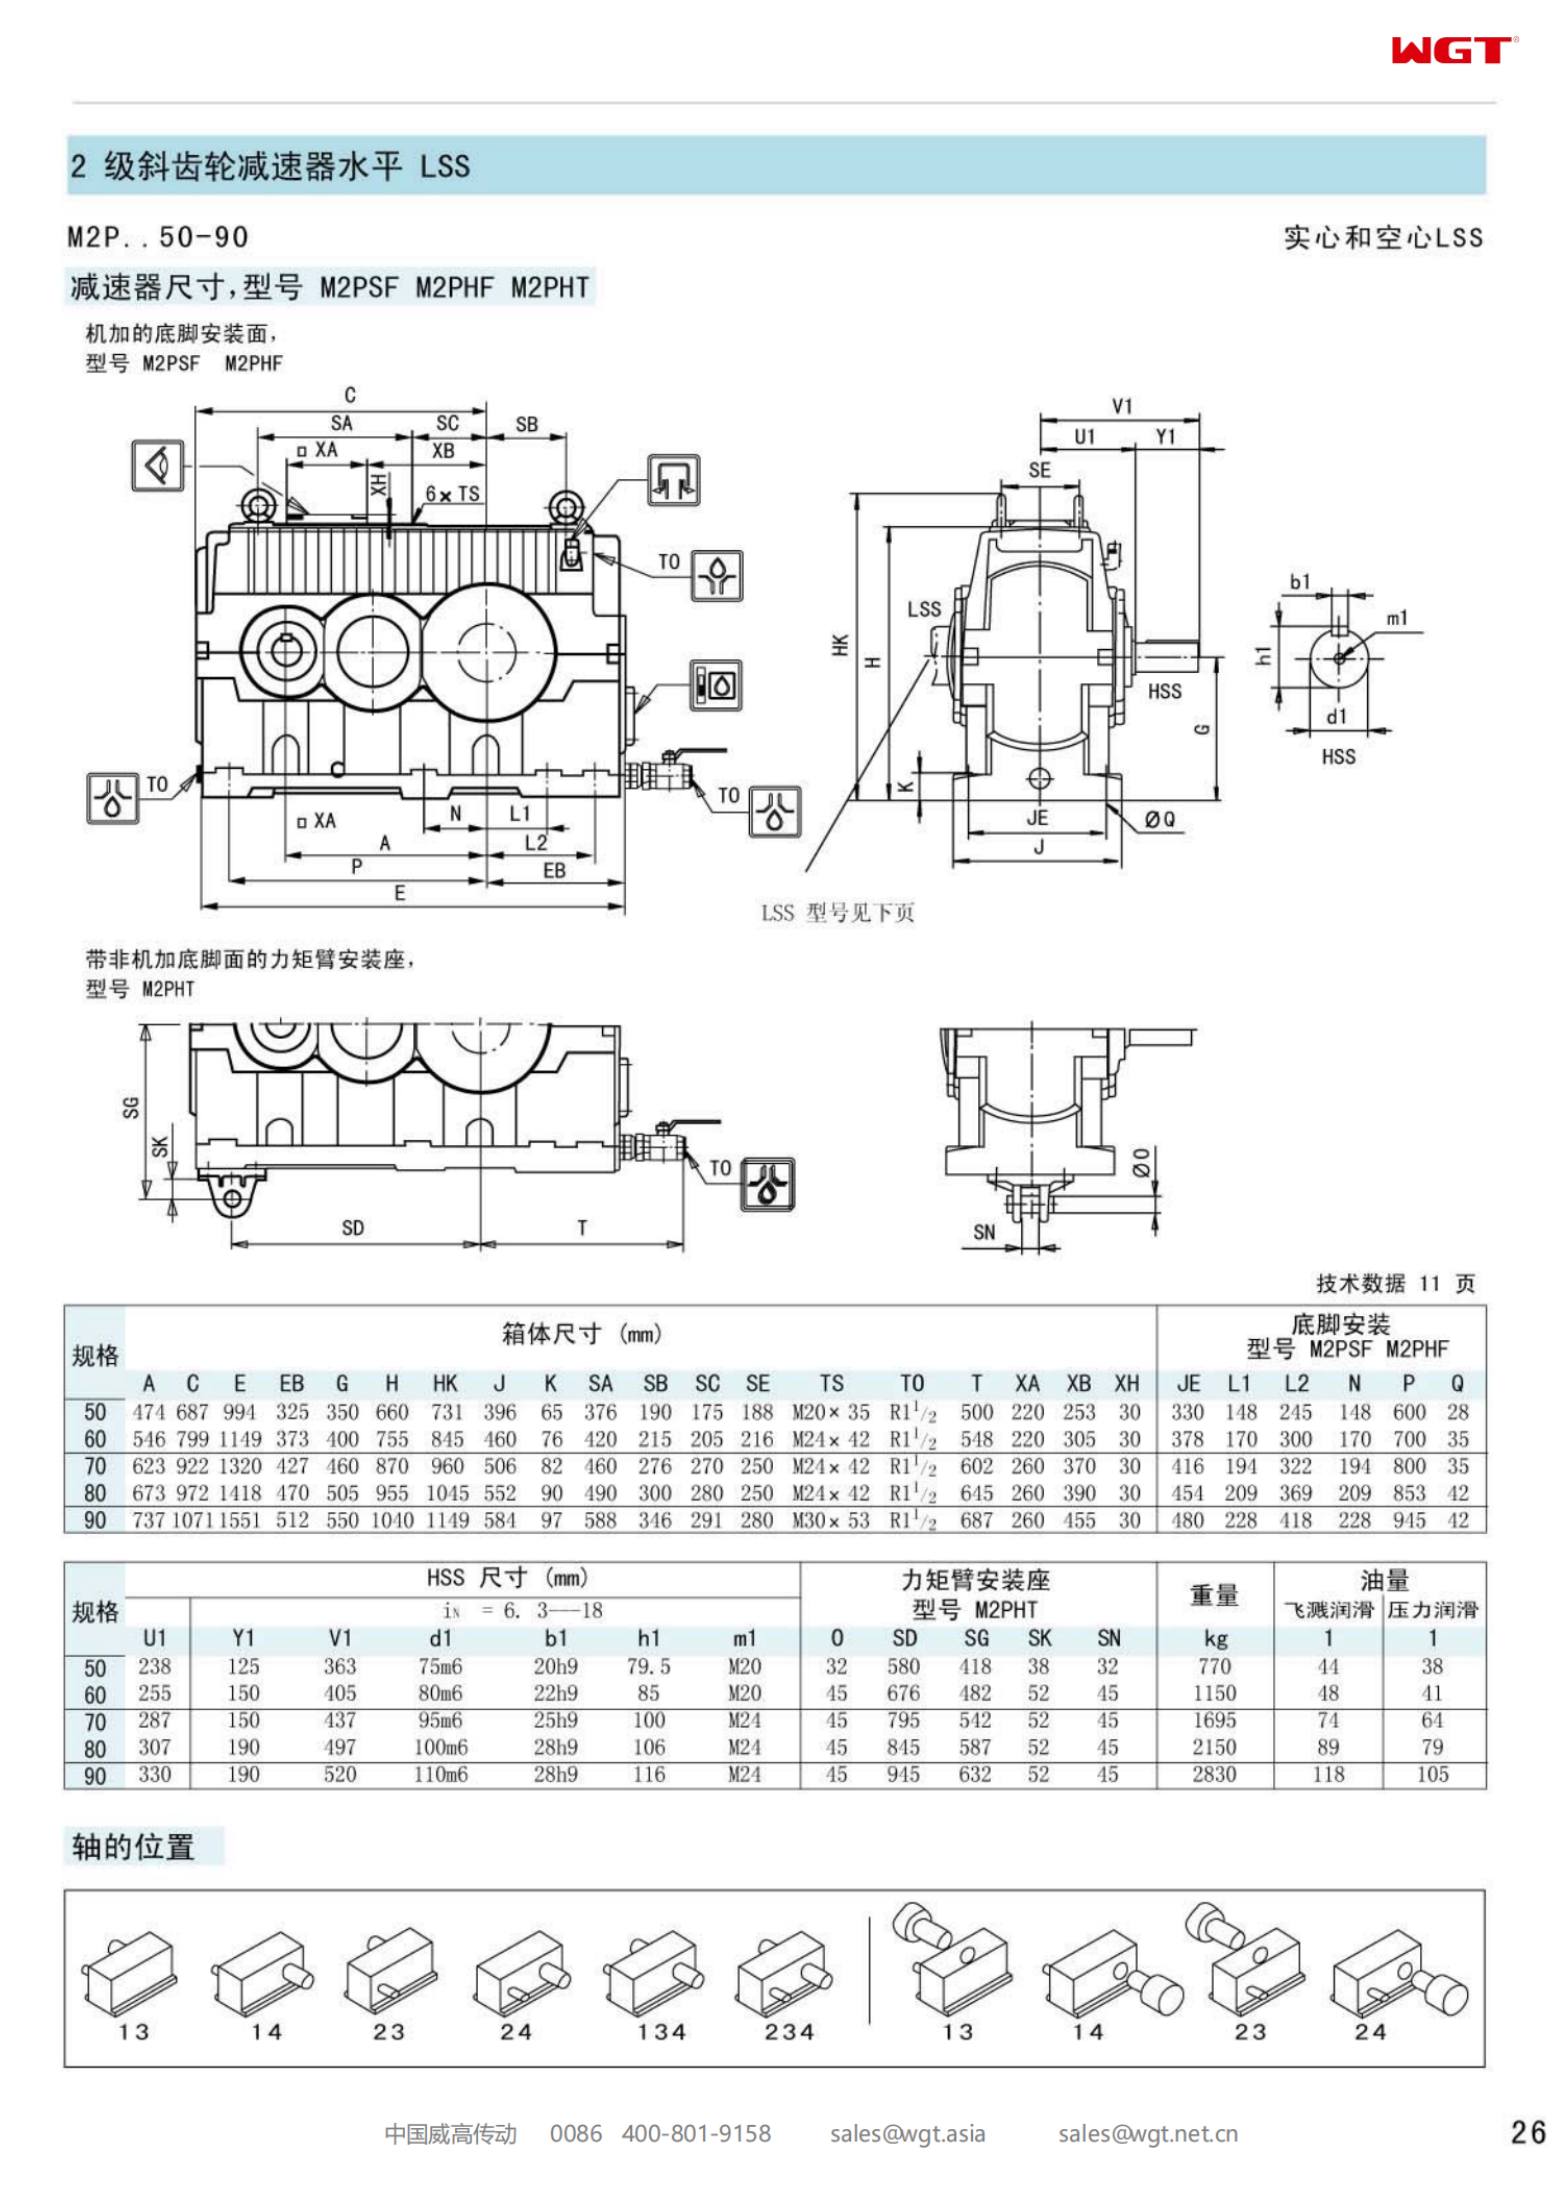 M2PSF60 replaces _SEW_M_Series gearbox (patent) 